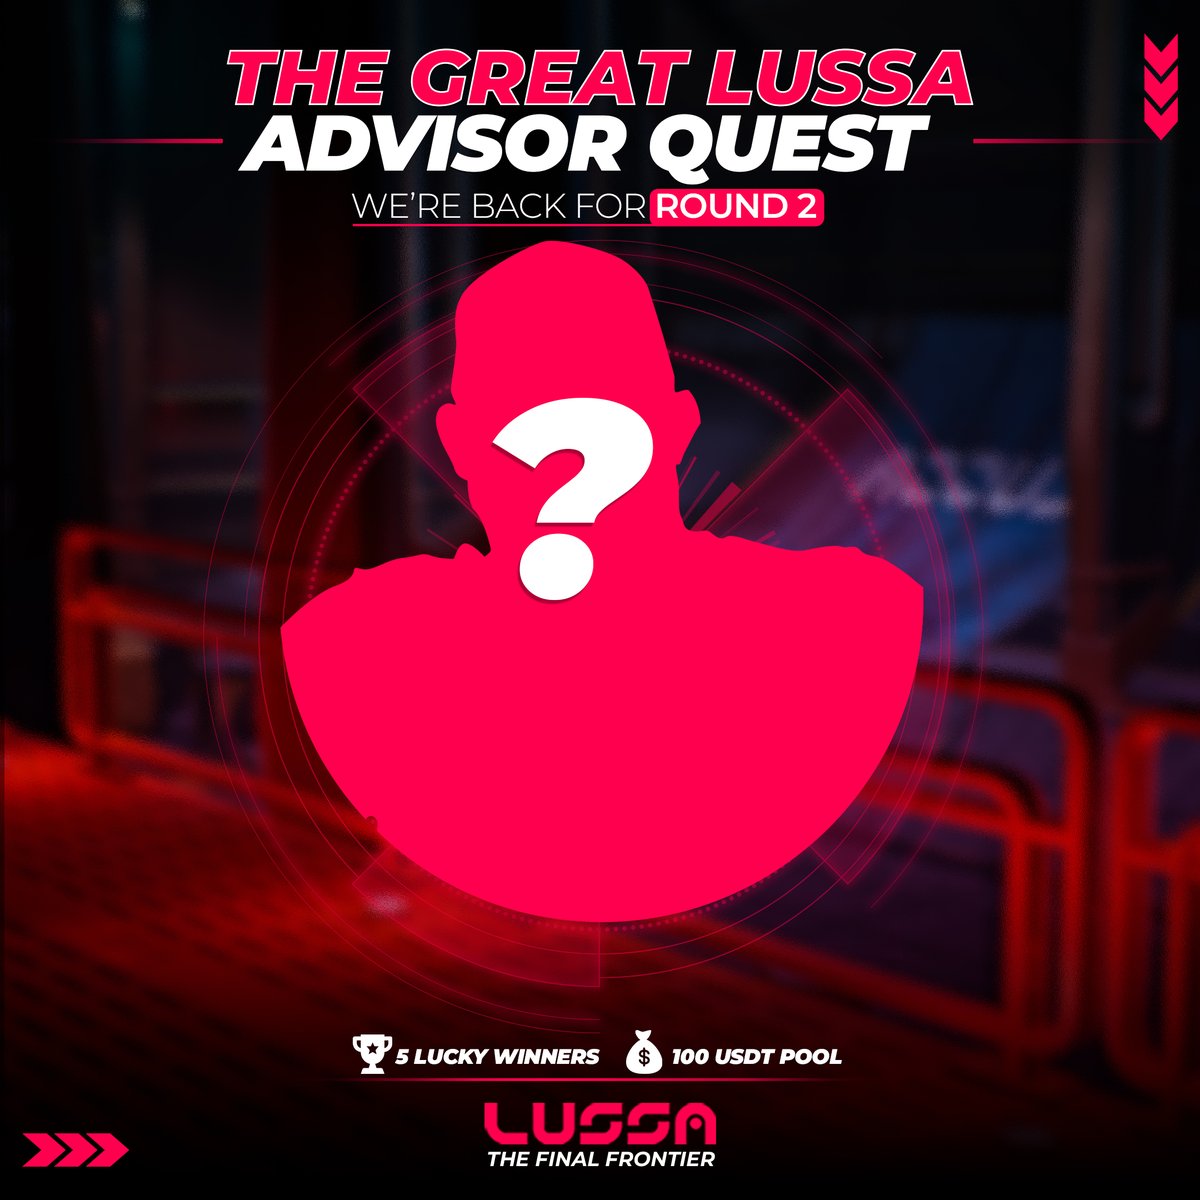 🚀 We’ve got a new advisor! Can you guess who? Take our quiz for a chance to win! 🏆: 5 Lucky Winners 💰: 20 USD each ⌛️: 19th-21st April Drop your guesses below for the big reveal! 🚀 #LussaAdvisor #GameChanger #BlockchainGaming 1. 🎮🦖 Co-Founder of a gaming studio known